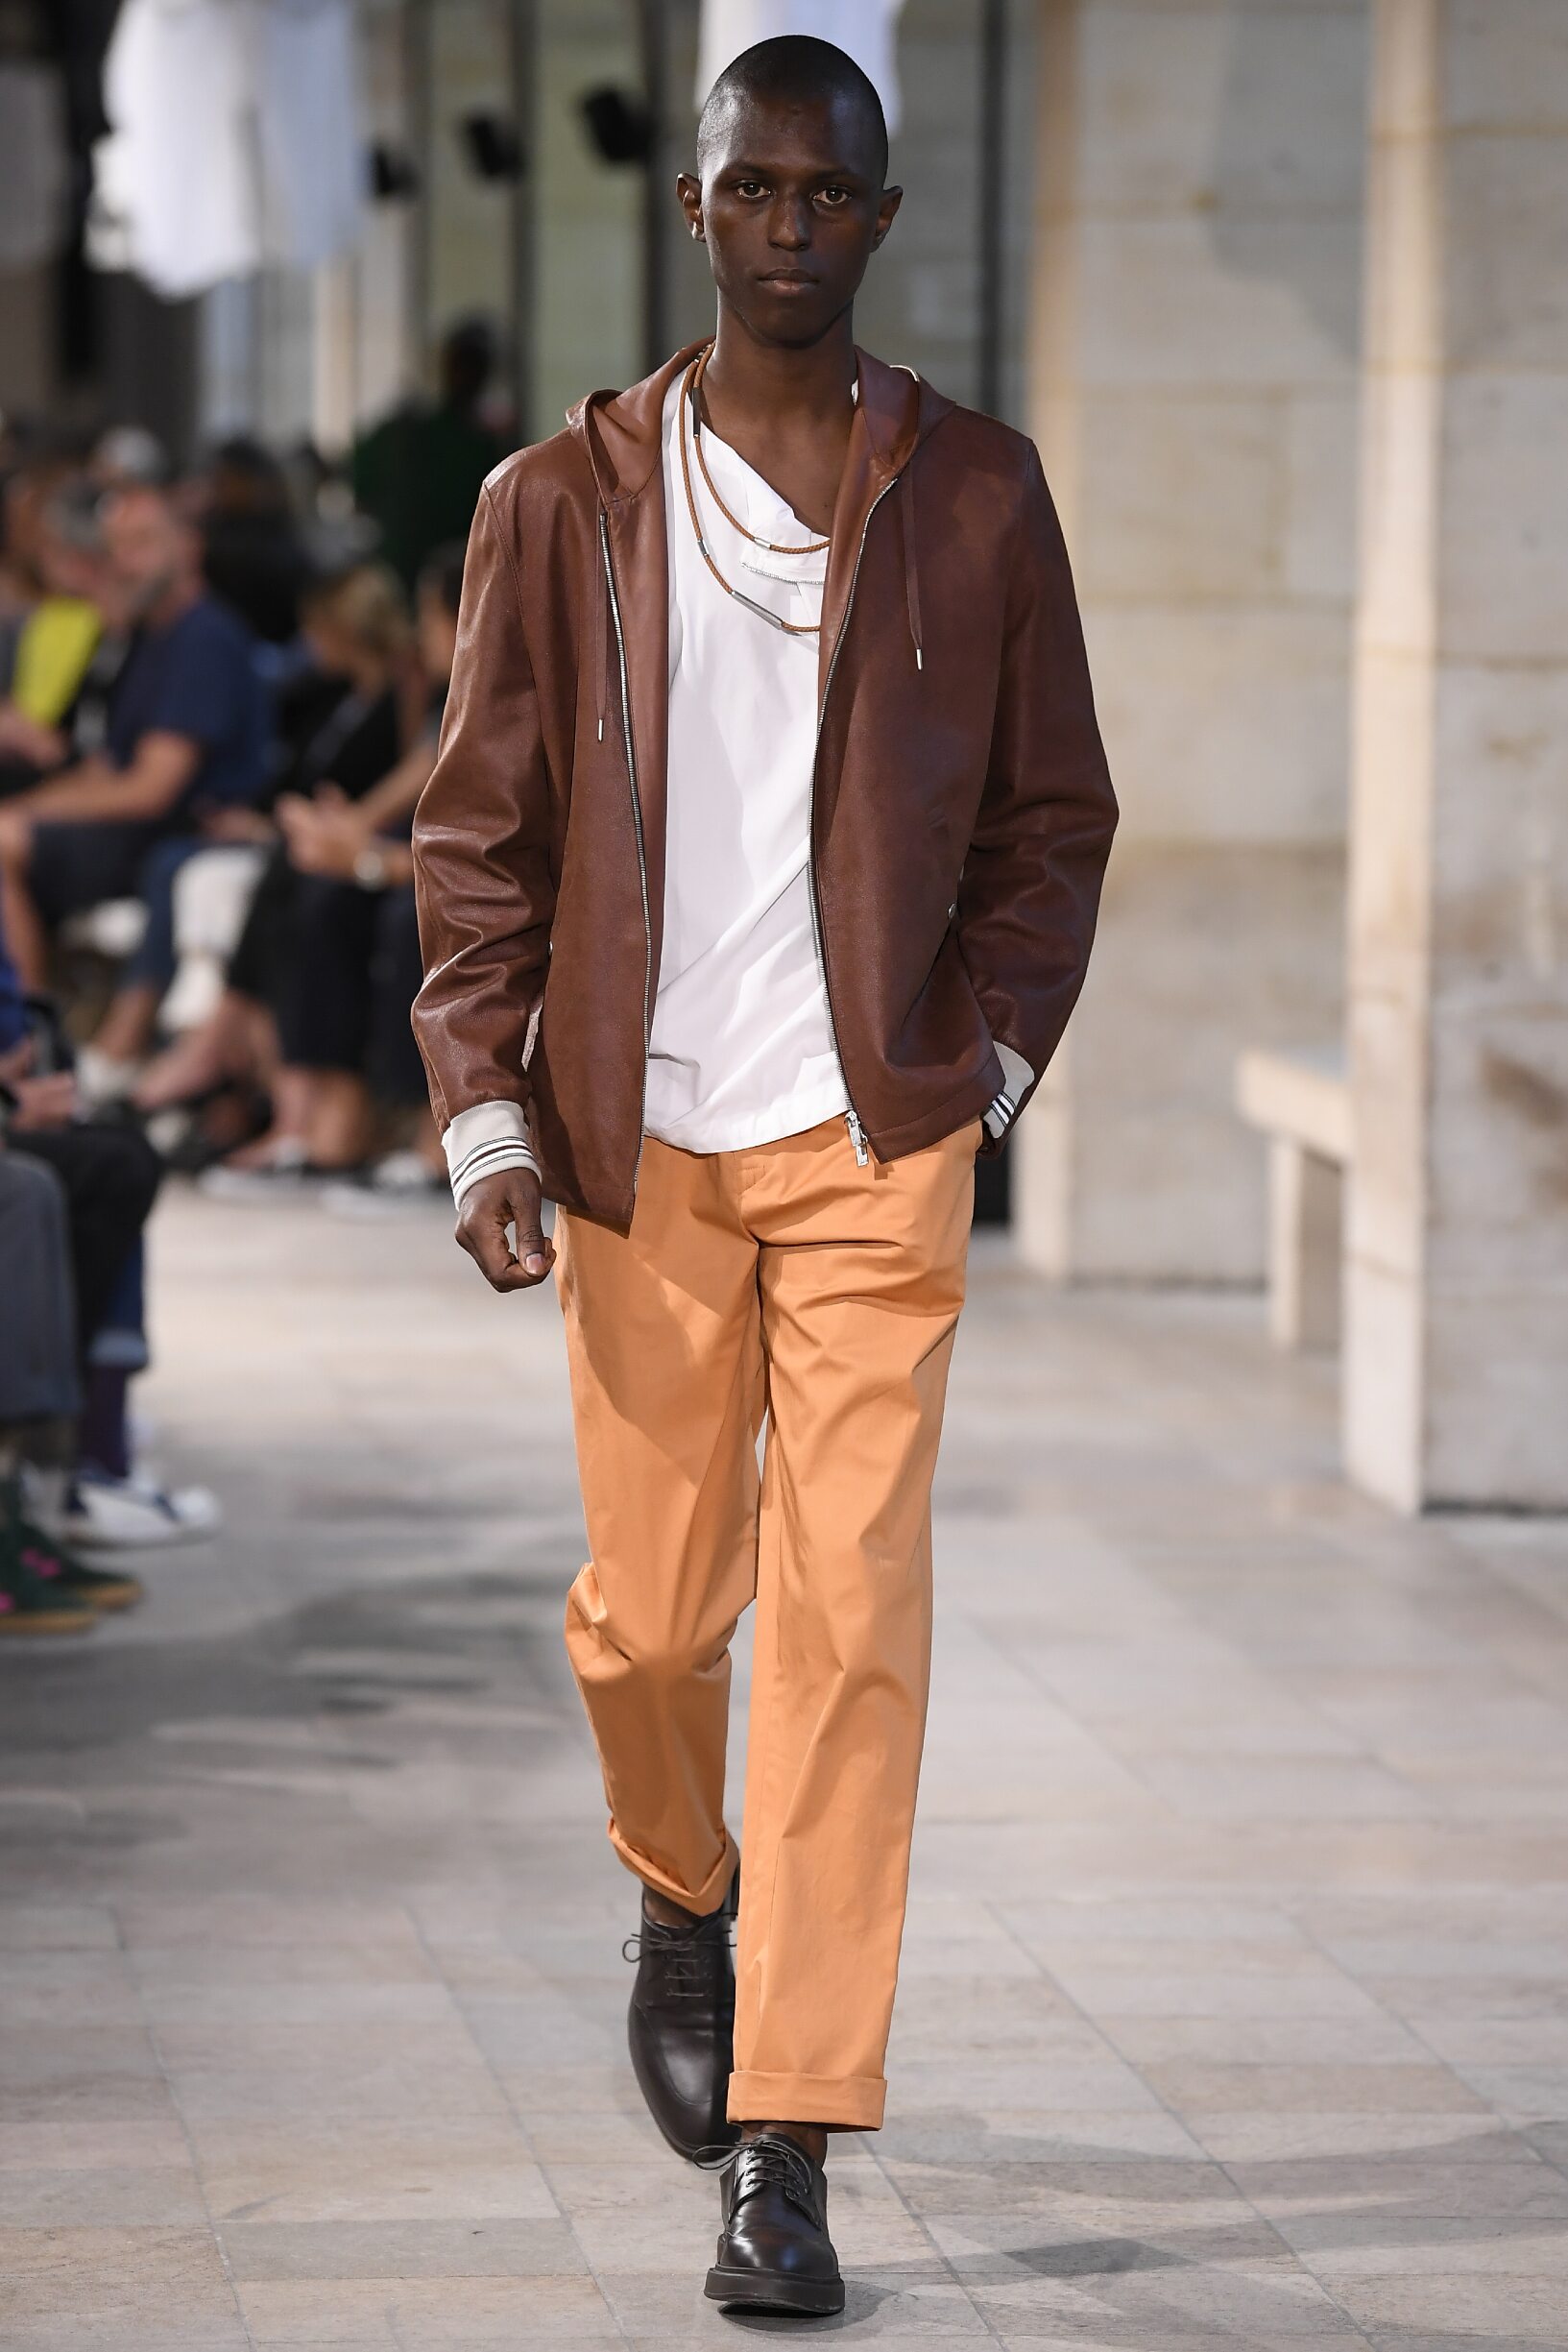 HERMÈS SPRING SUMMER 2019 MEN’S COLLECTION | The Skinny Beep